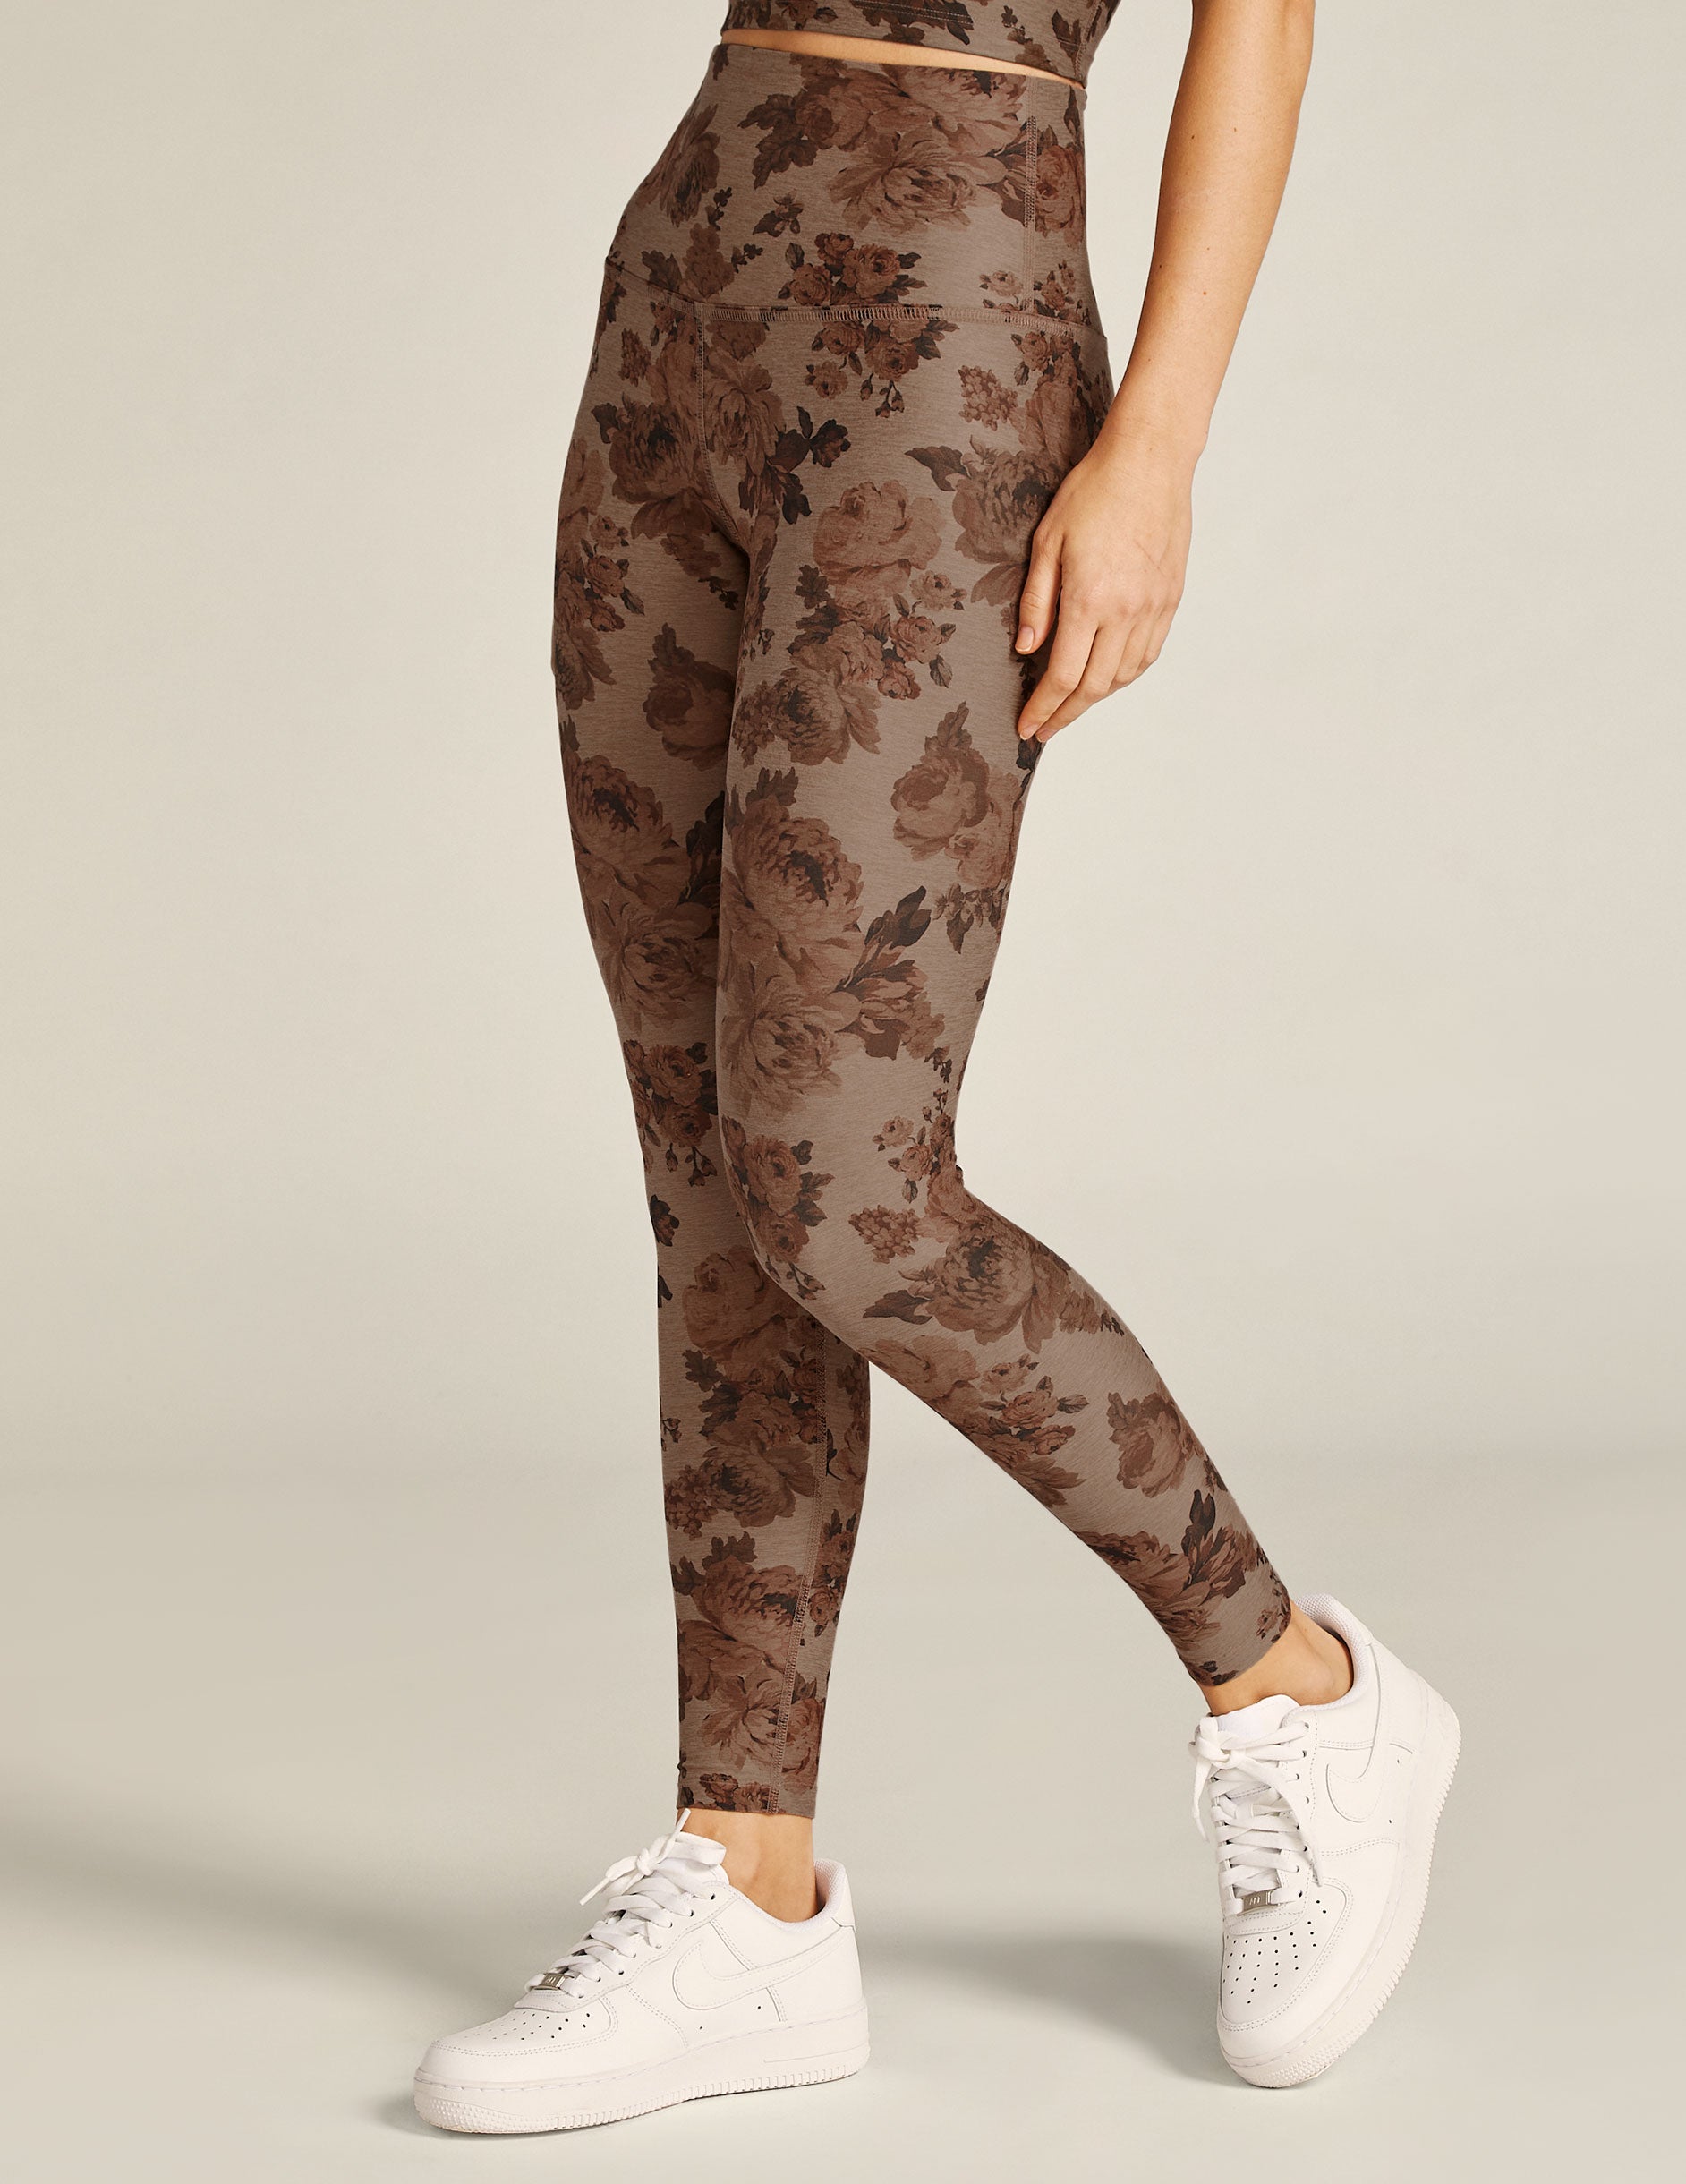 Beyond Yoga Twinkle High Waisted Midi Leggings Wild Orchid Size